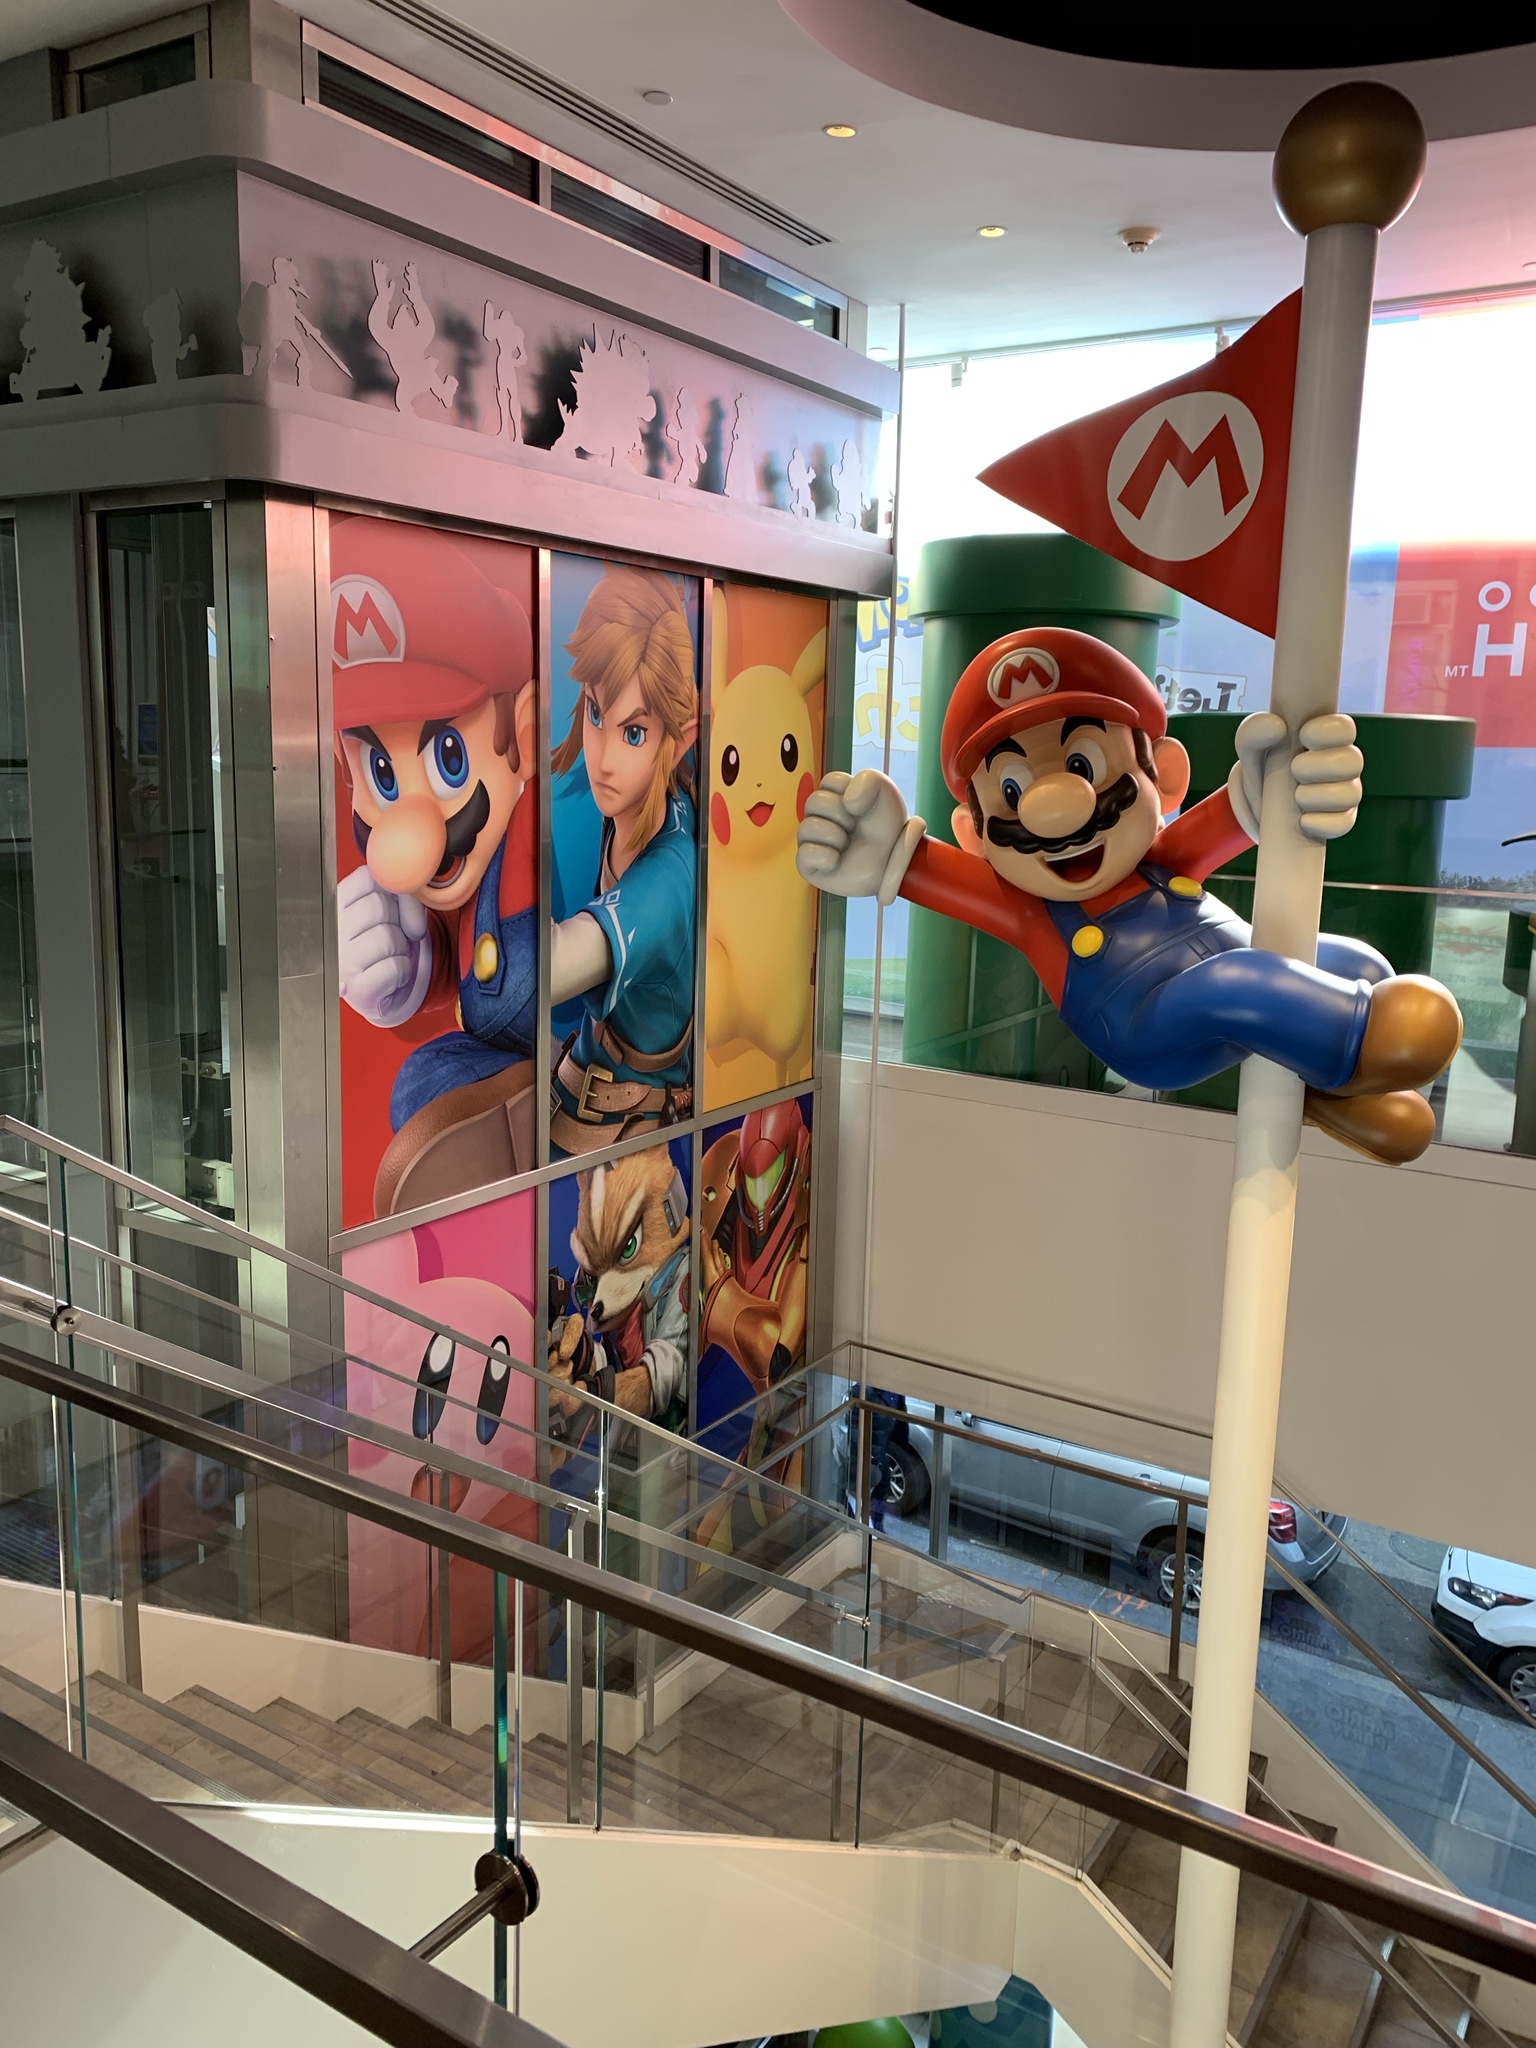 I wouldn't be able to resist the temptation to jump from that staircase to the Mario flagpole